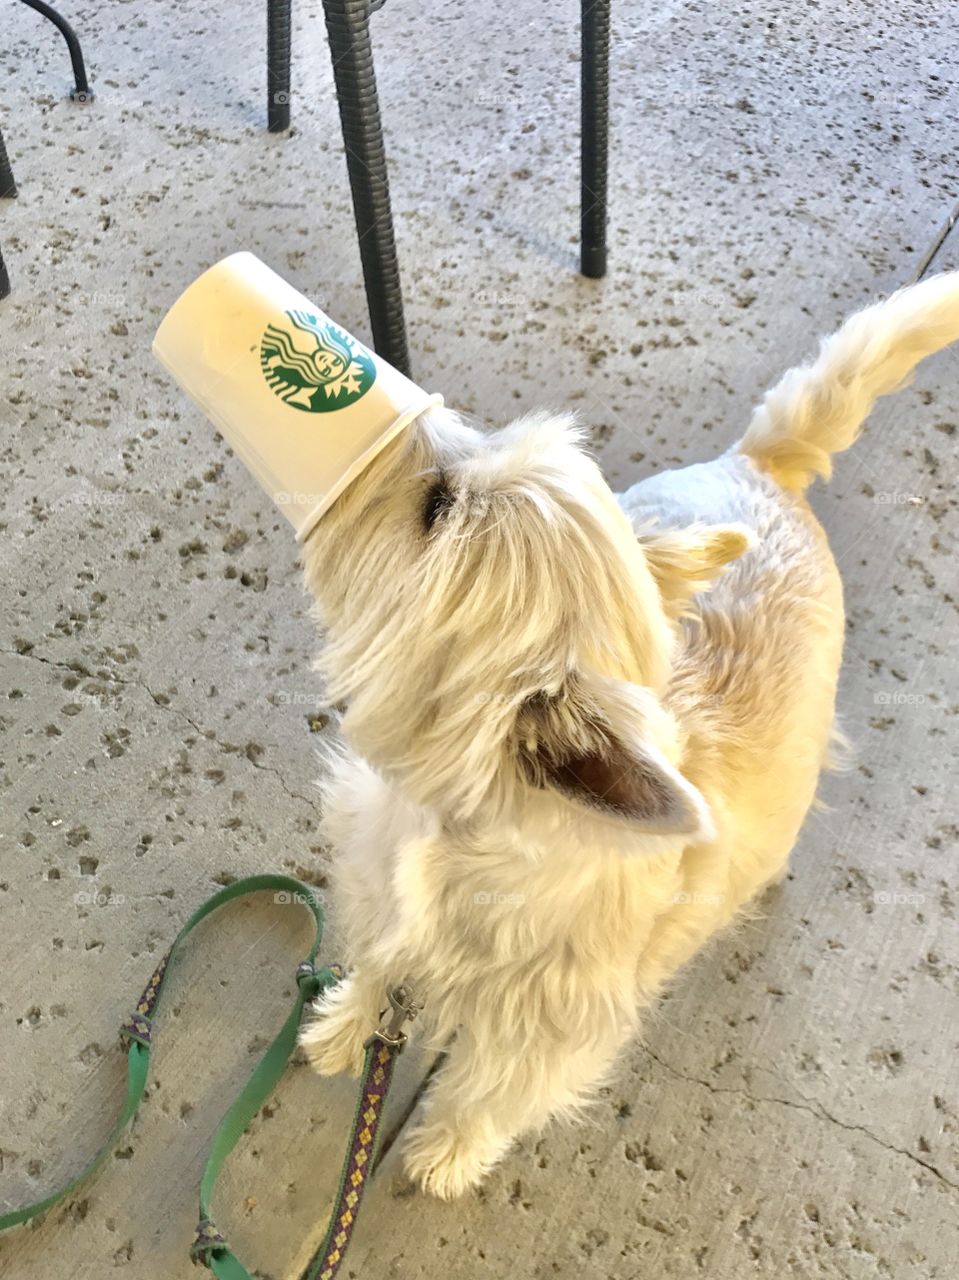 Puppacino consumption.... on my own!!!